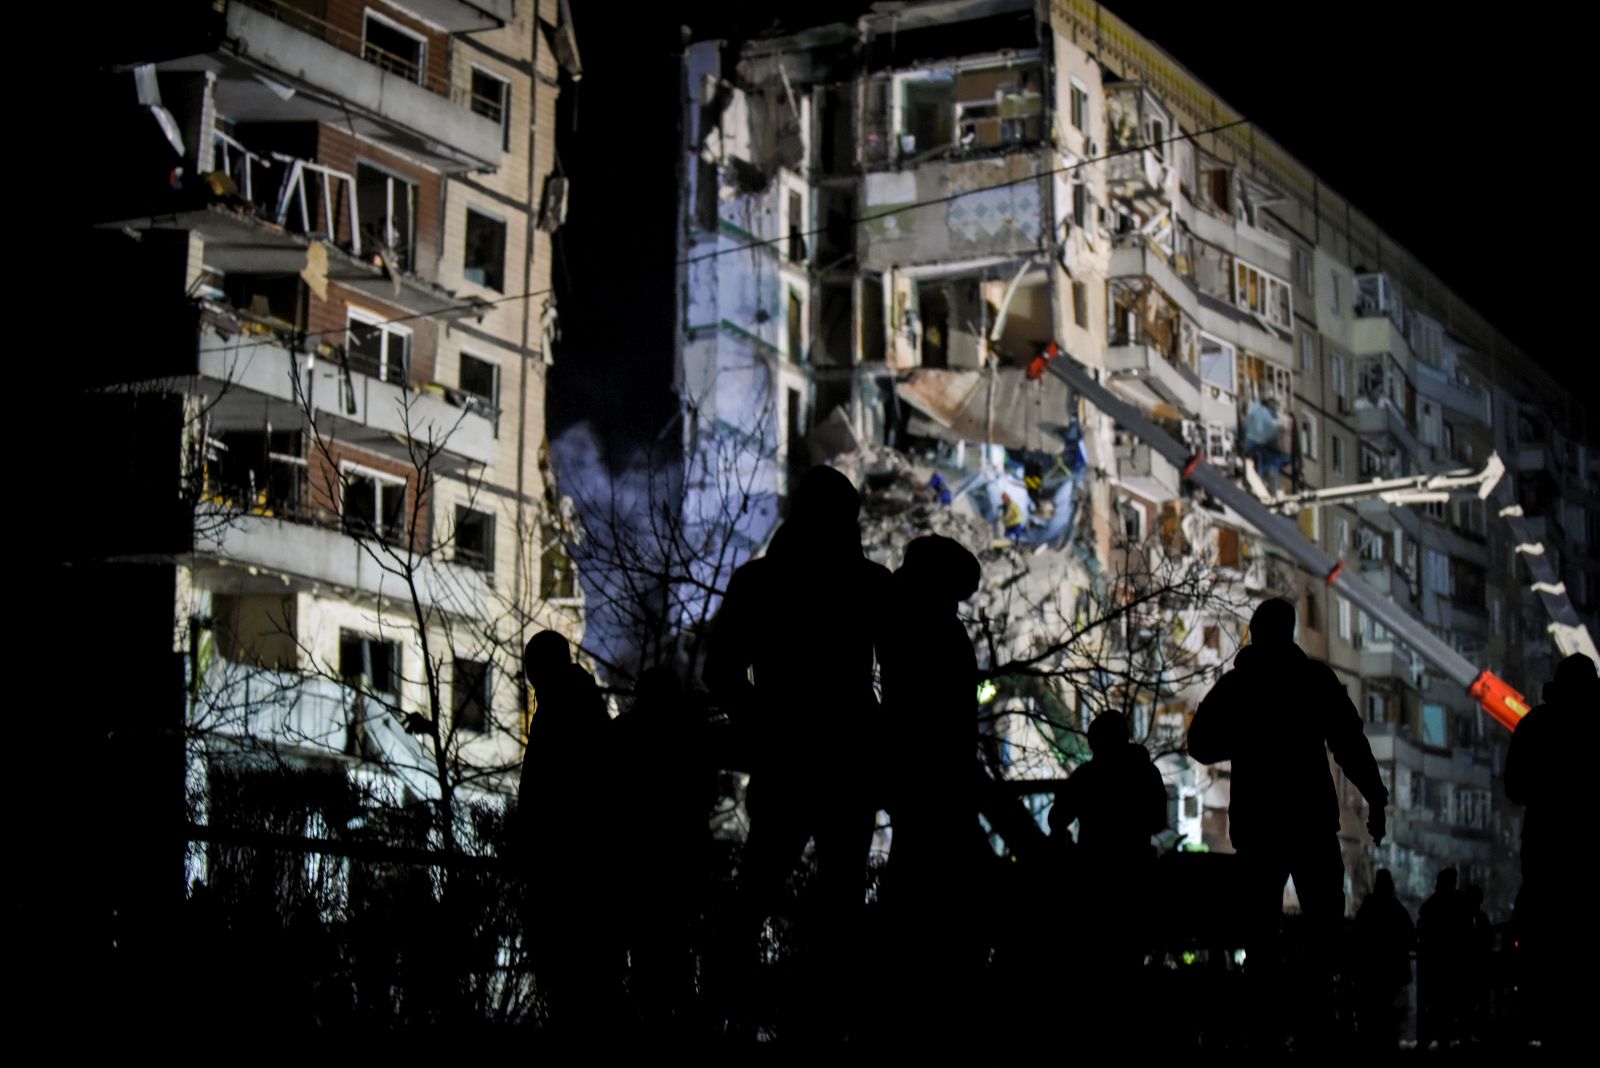 epa10407418 A group of people stands near the site of a damaged residential building as rescue work continues, in Dnipro, southeastern Ukraine, 15 January 2023, amid Russia's invasion. At least 25 people died, including one child, 73 other were injured, including 13 children, and 43 reports of missing persons were received, after a rocket hit a nine-story building in Dnipro on 14 January, the State Emergency Service (SES) of Ukraine said in a statement. Russian troops entered Ukraine on 24 February 2022 starting a conflict that has provoked destruction and a humanitarian crisis.  EPA/OLEG PETRASYUK